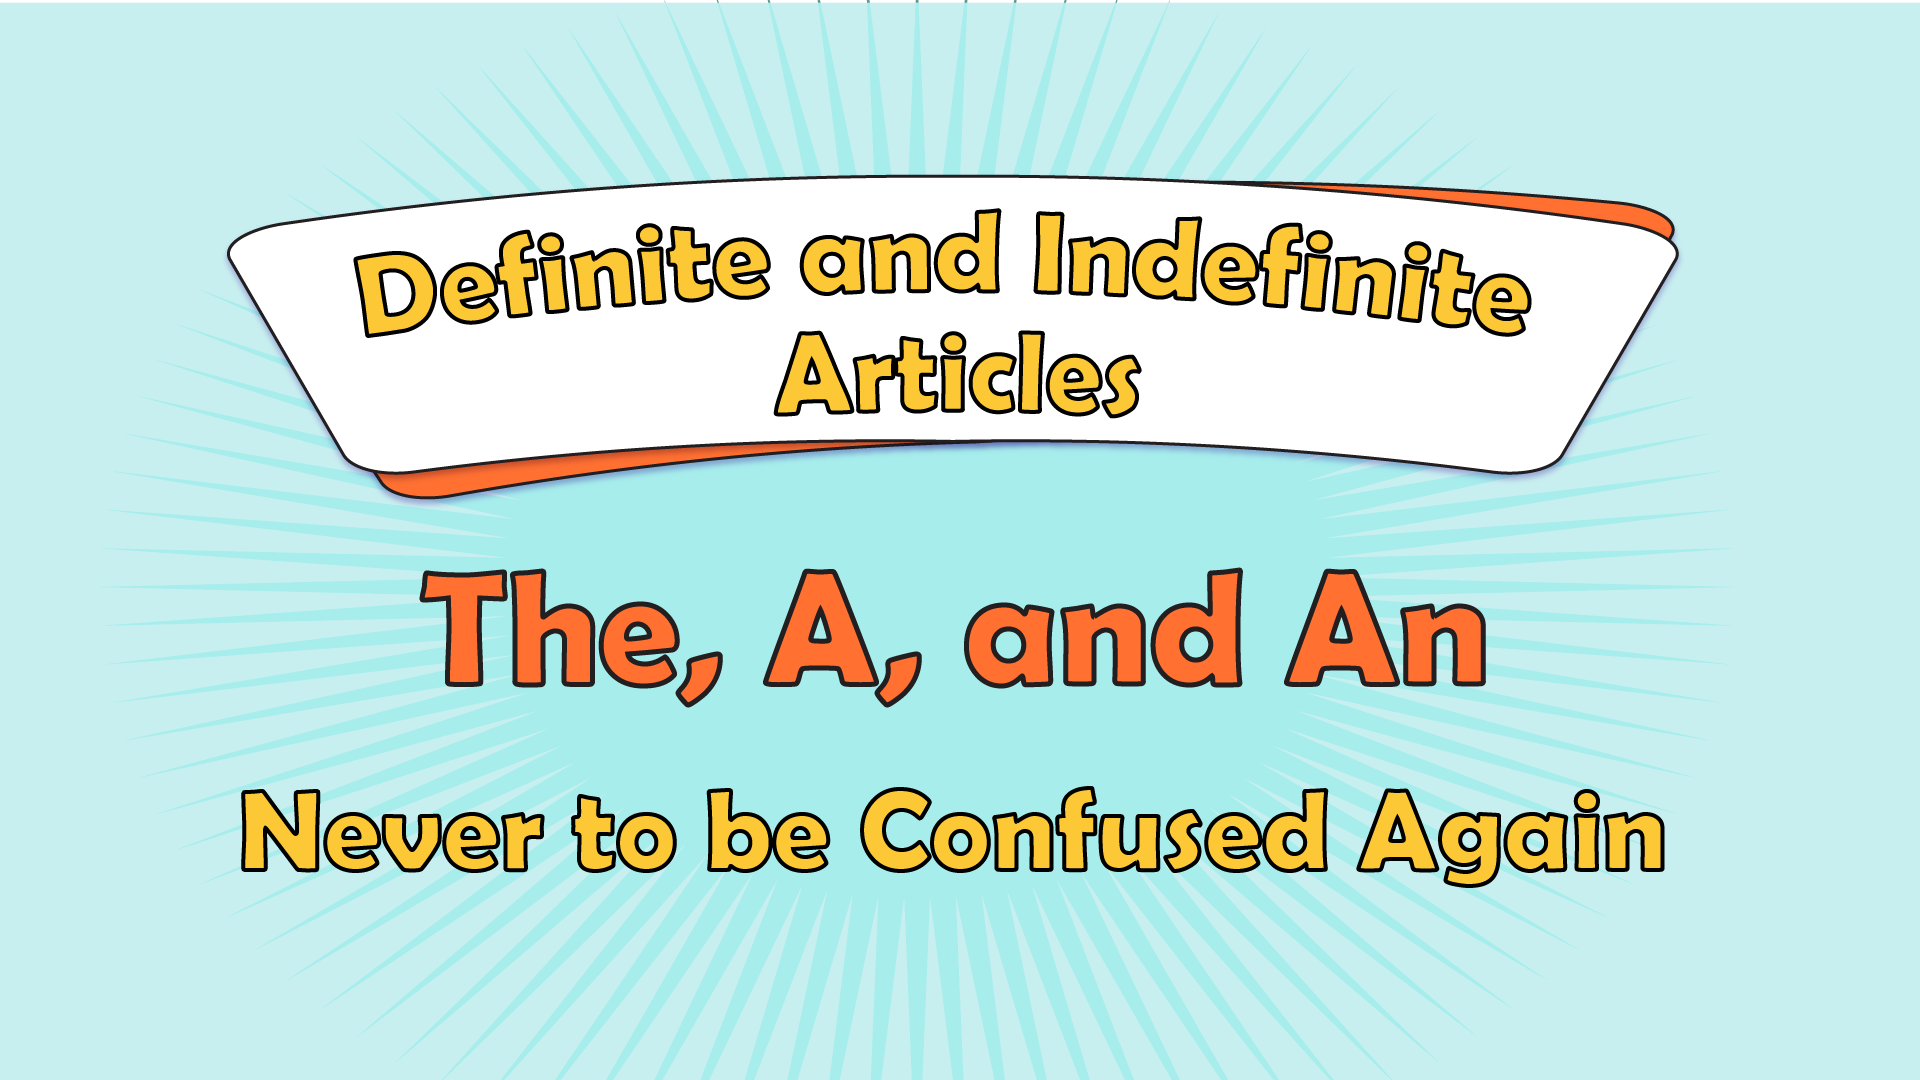 Definite and Indefinite Articles; The, A, and An Never to be Confused Again